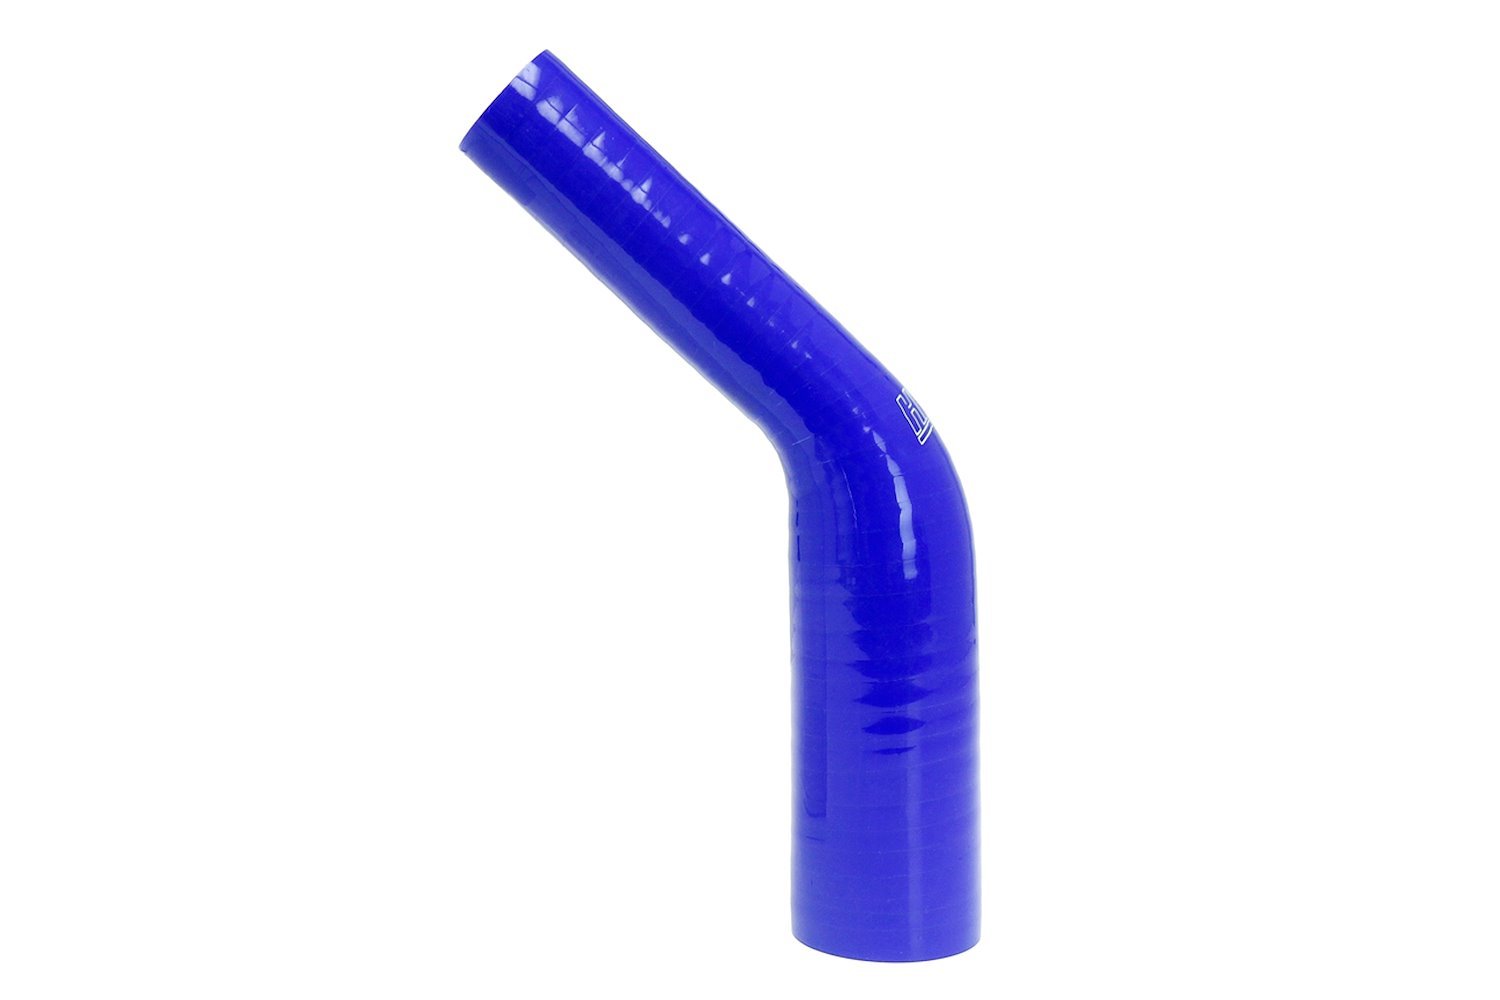 HTSER45-087-138-BLUE Silicone 45-Degree Elbow Hose, High-Temp 4-Ply Reinforced, 7/8 in. - 1-3/8 in. ID, Blue